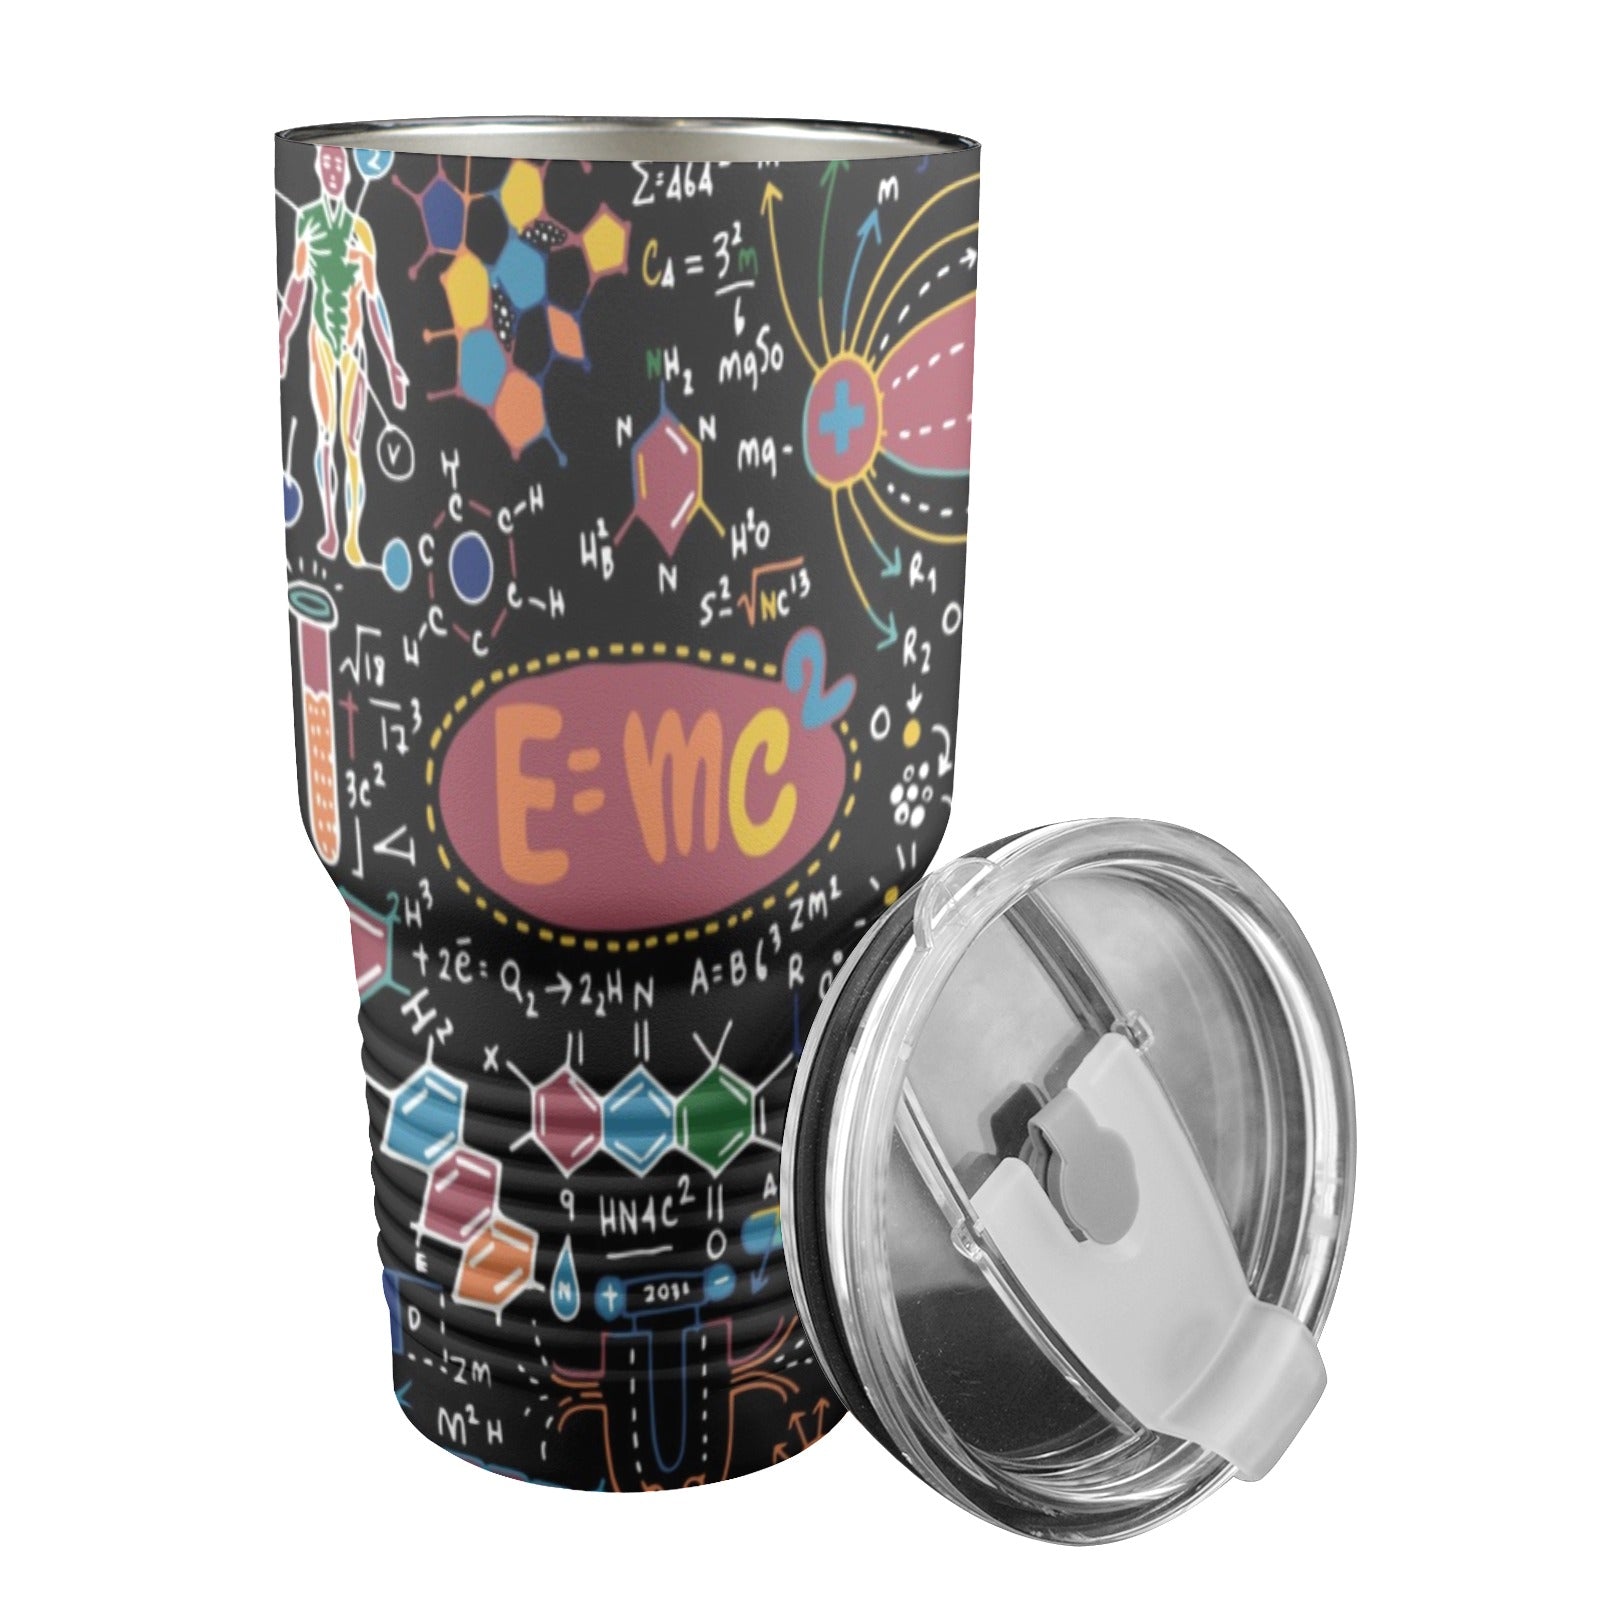 Science Time - 30oz Insulated Stainless Steel Mobile Tumbler 30oz Insulated Stainless Steel Mobile Tumbler Science